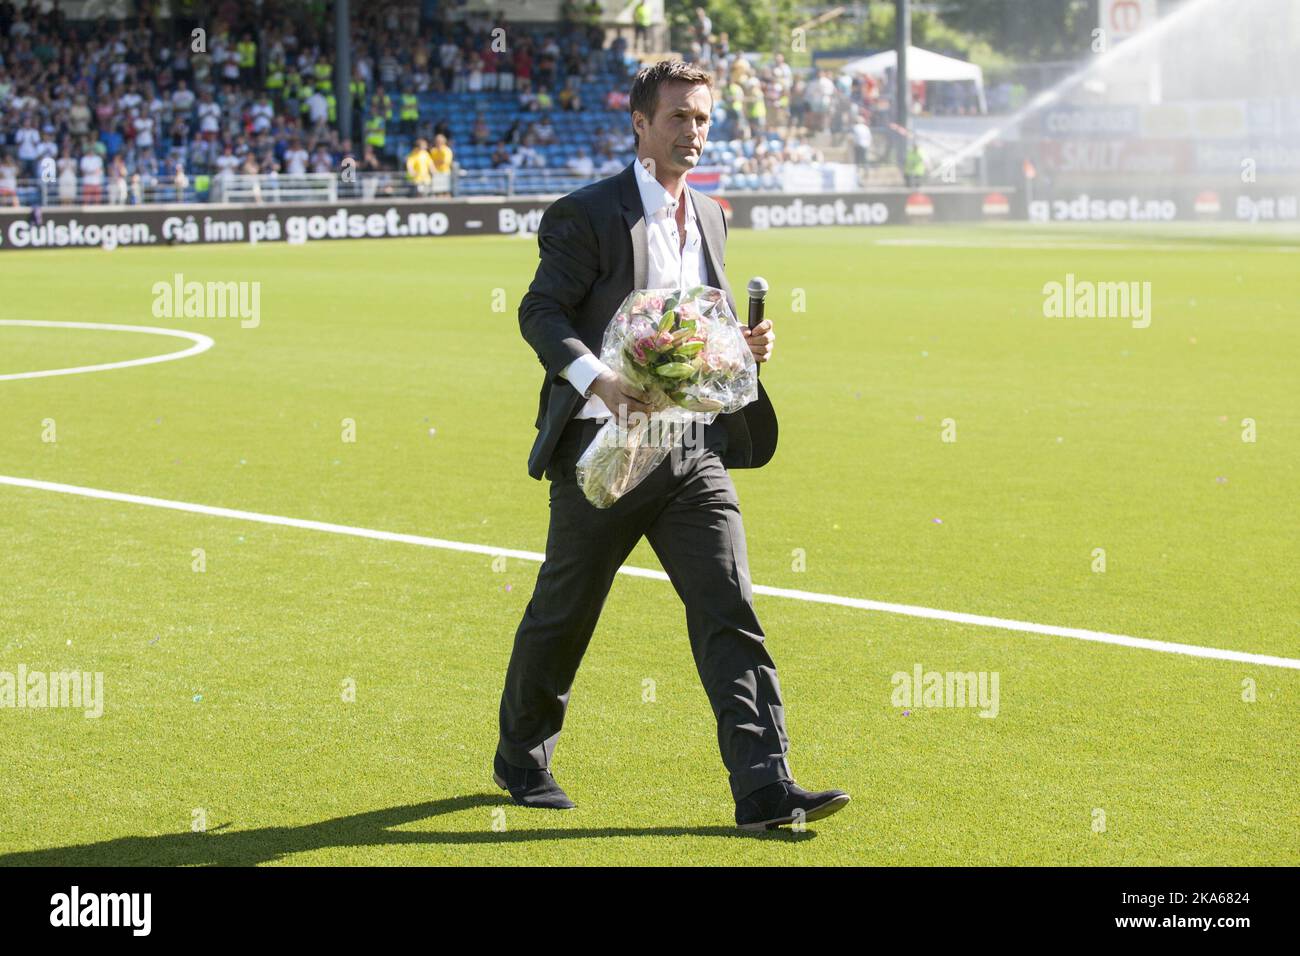 Outgoing manager of Stromsgodset FK and incoming manager of Scottish Premiership club Celtic Ronny Deila reacts after speaking to the supporters after half time of the match between Stomsgodset and Haugesund in the Norwegian top football league in Drammen, 9 June 2014. Photo by Audun Braastad, NTB scanpix Stock Photo